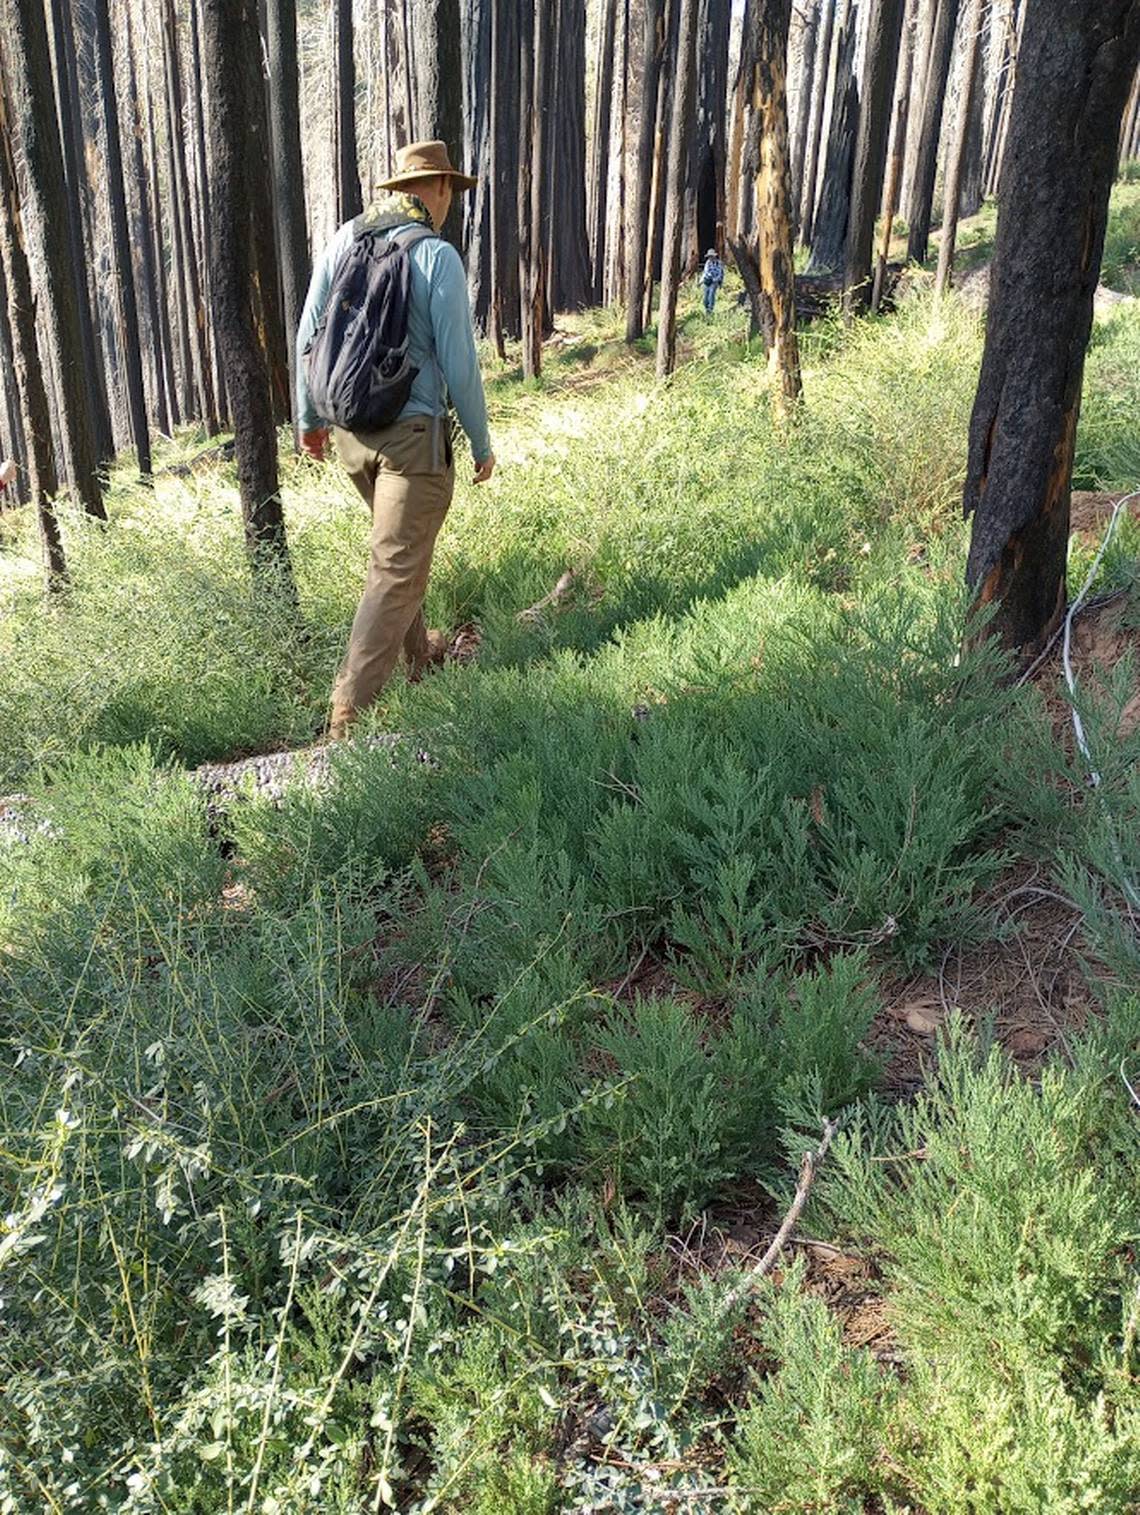 Chad Hanson walks along a sloping hillside with year-old sequoia seedlings.